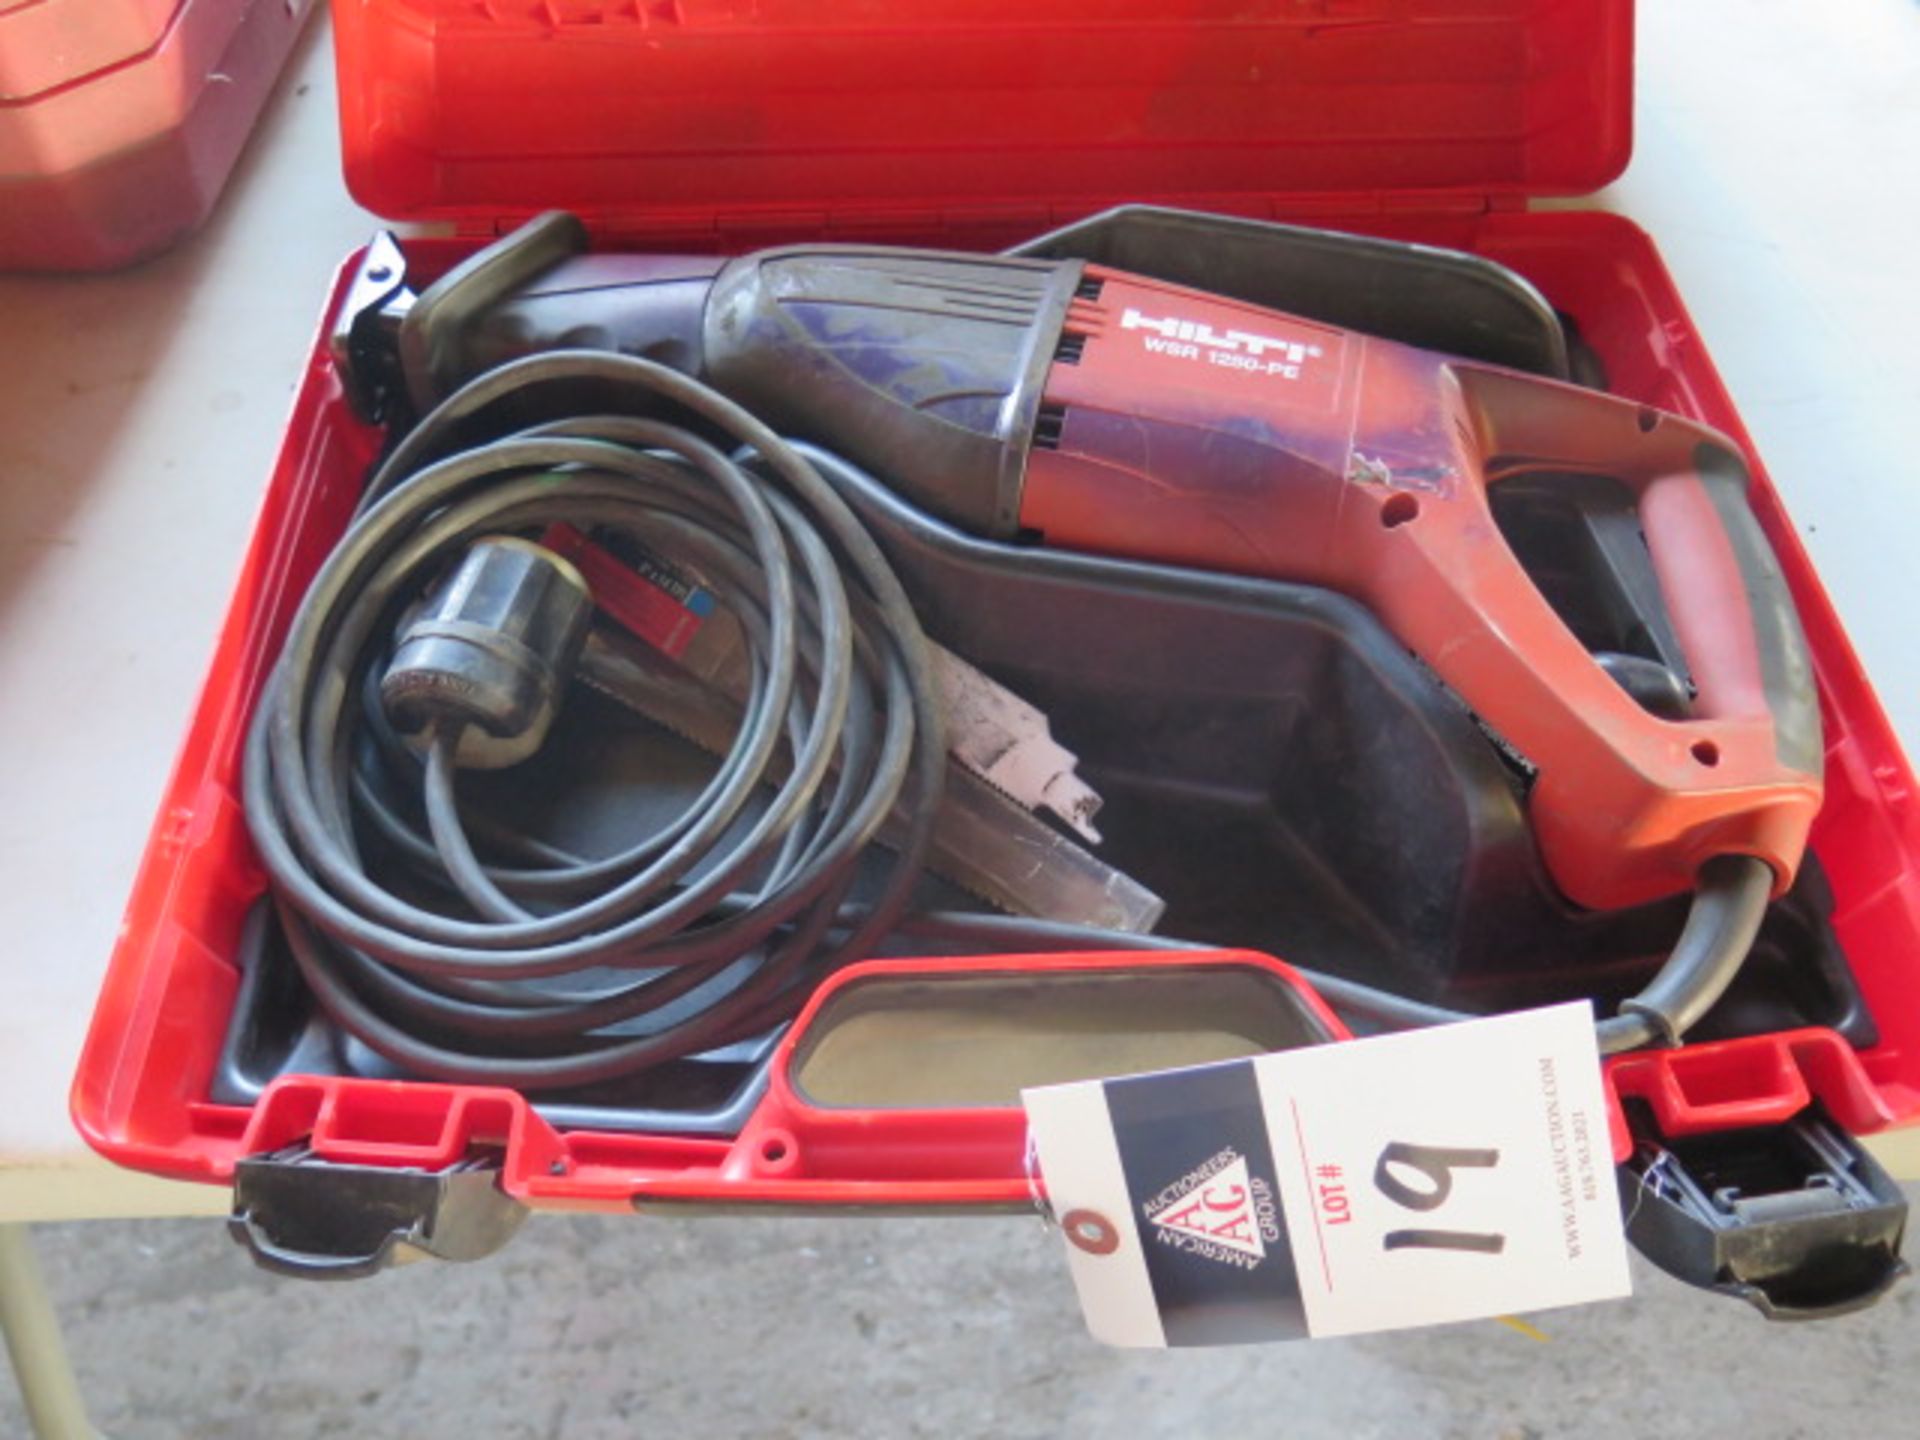 Hilti WSR 1250-PE Recipricating Saw (SOLD AS-IS - NO WARRANTY)